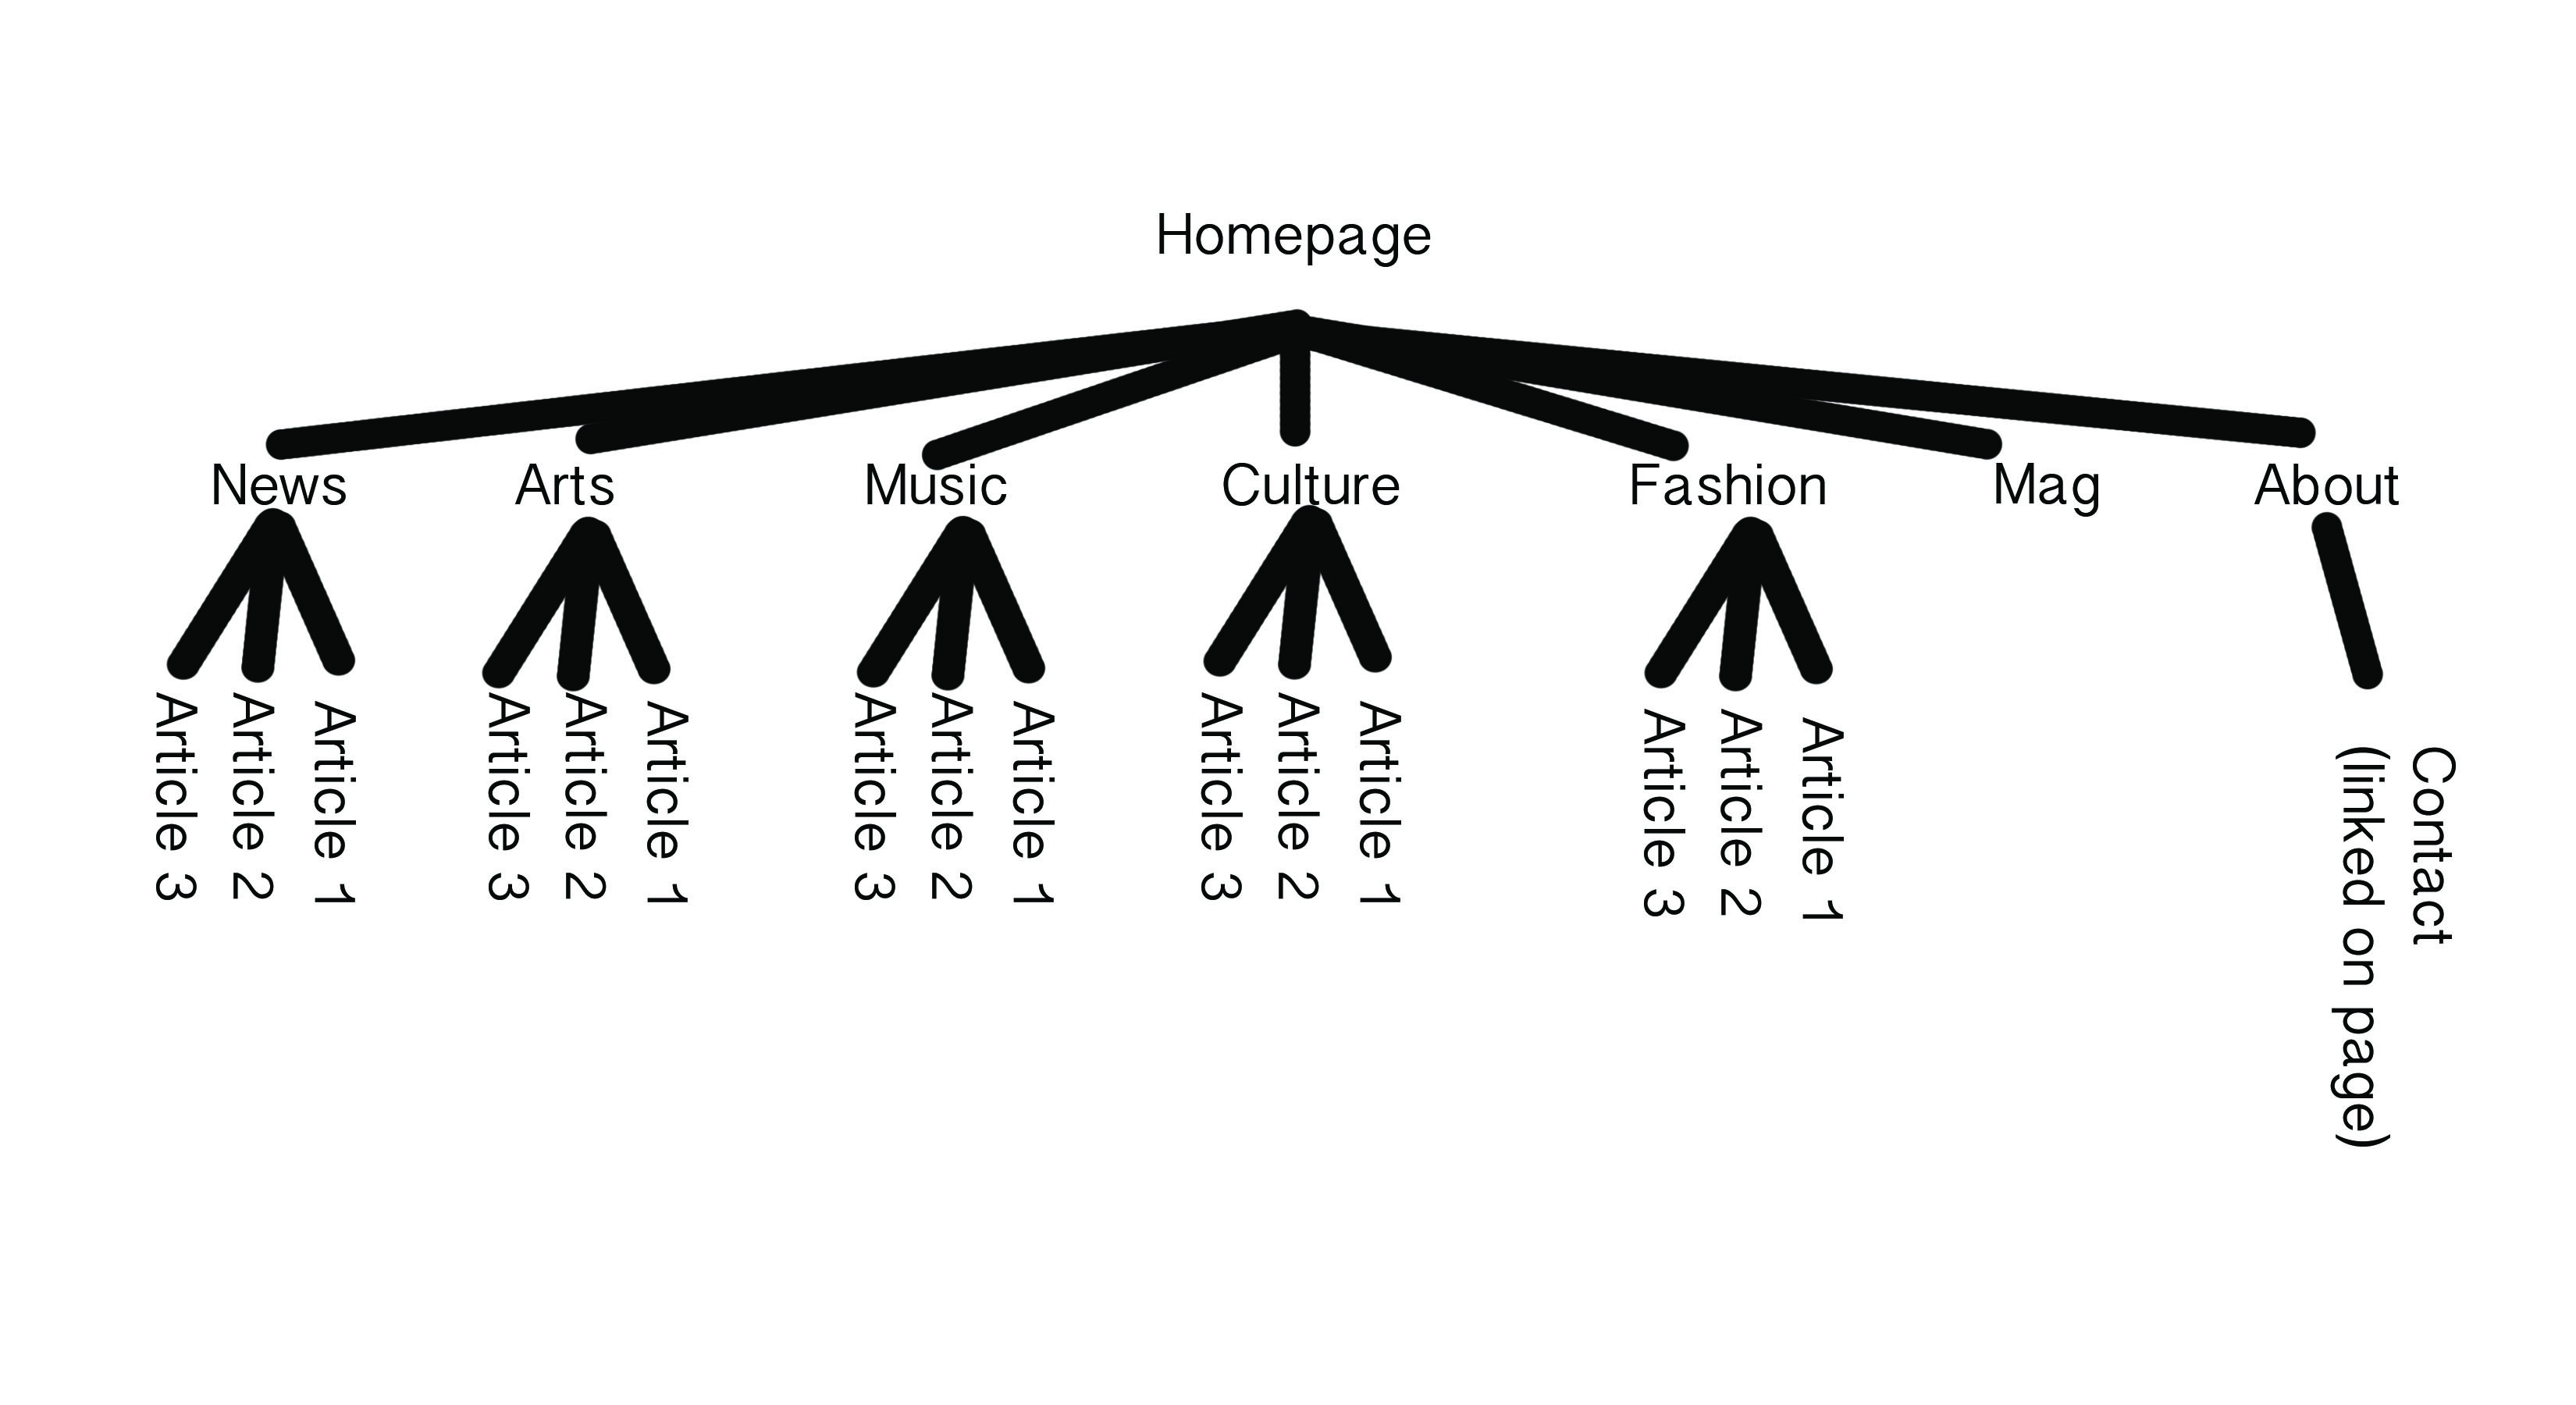 Structure of page in a tree diagram